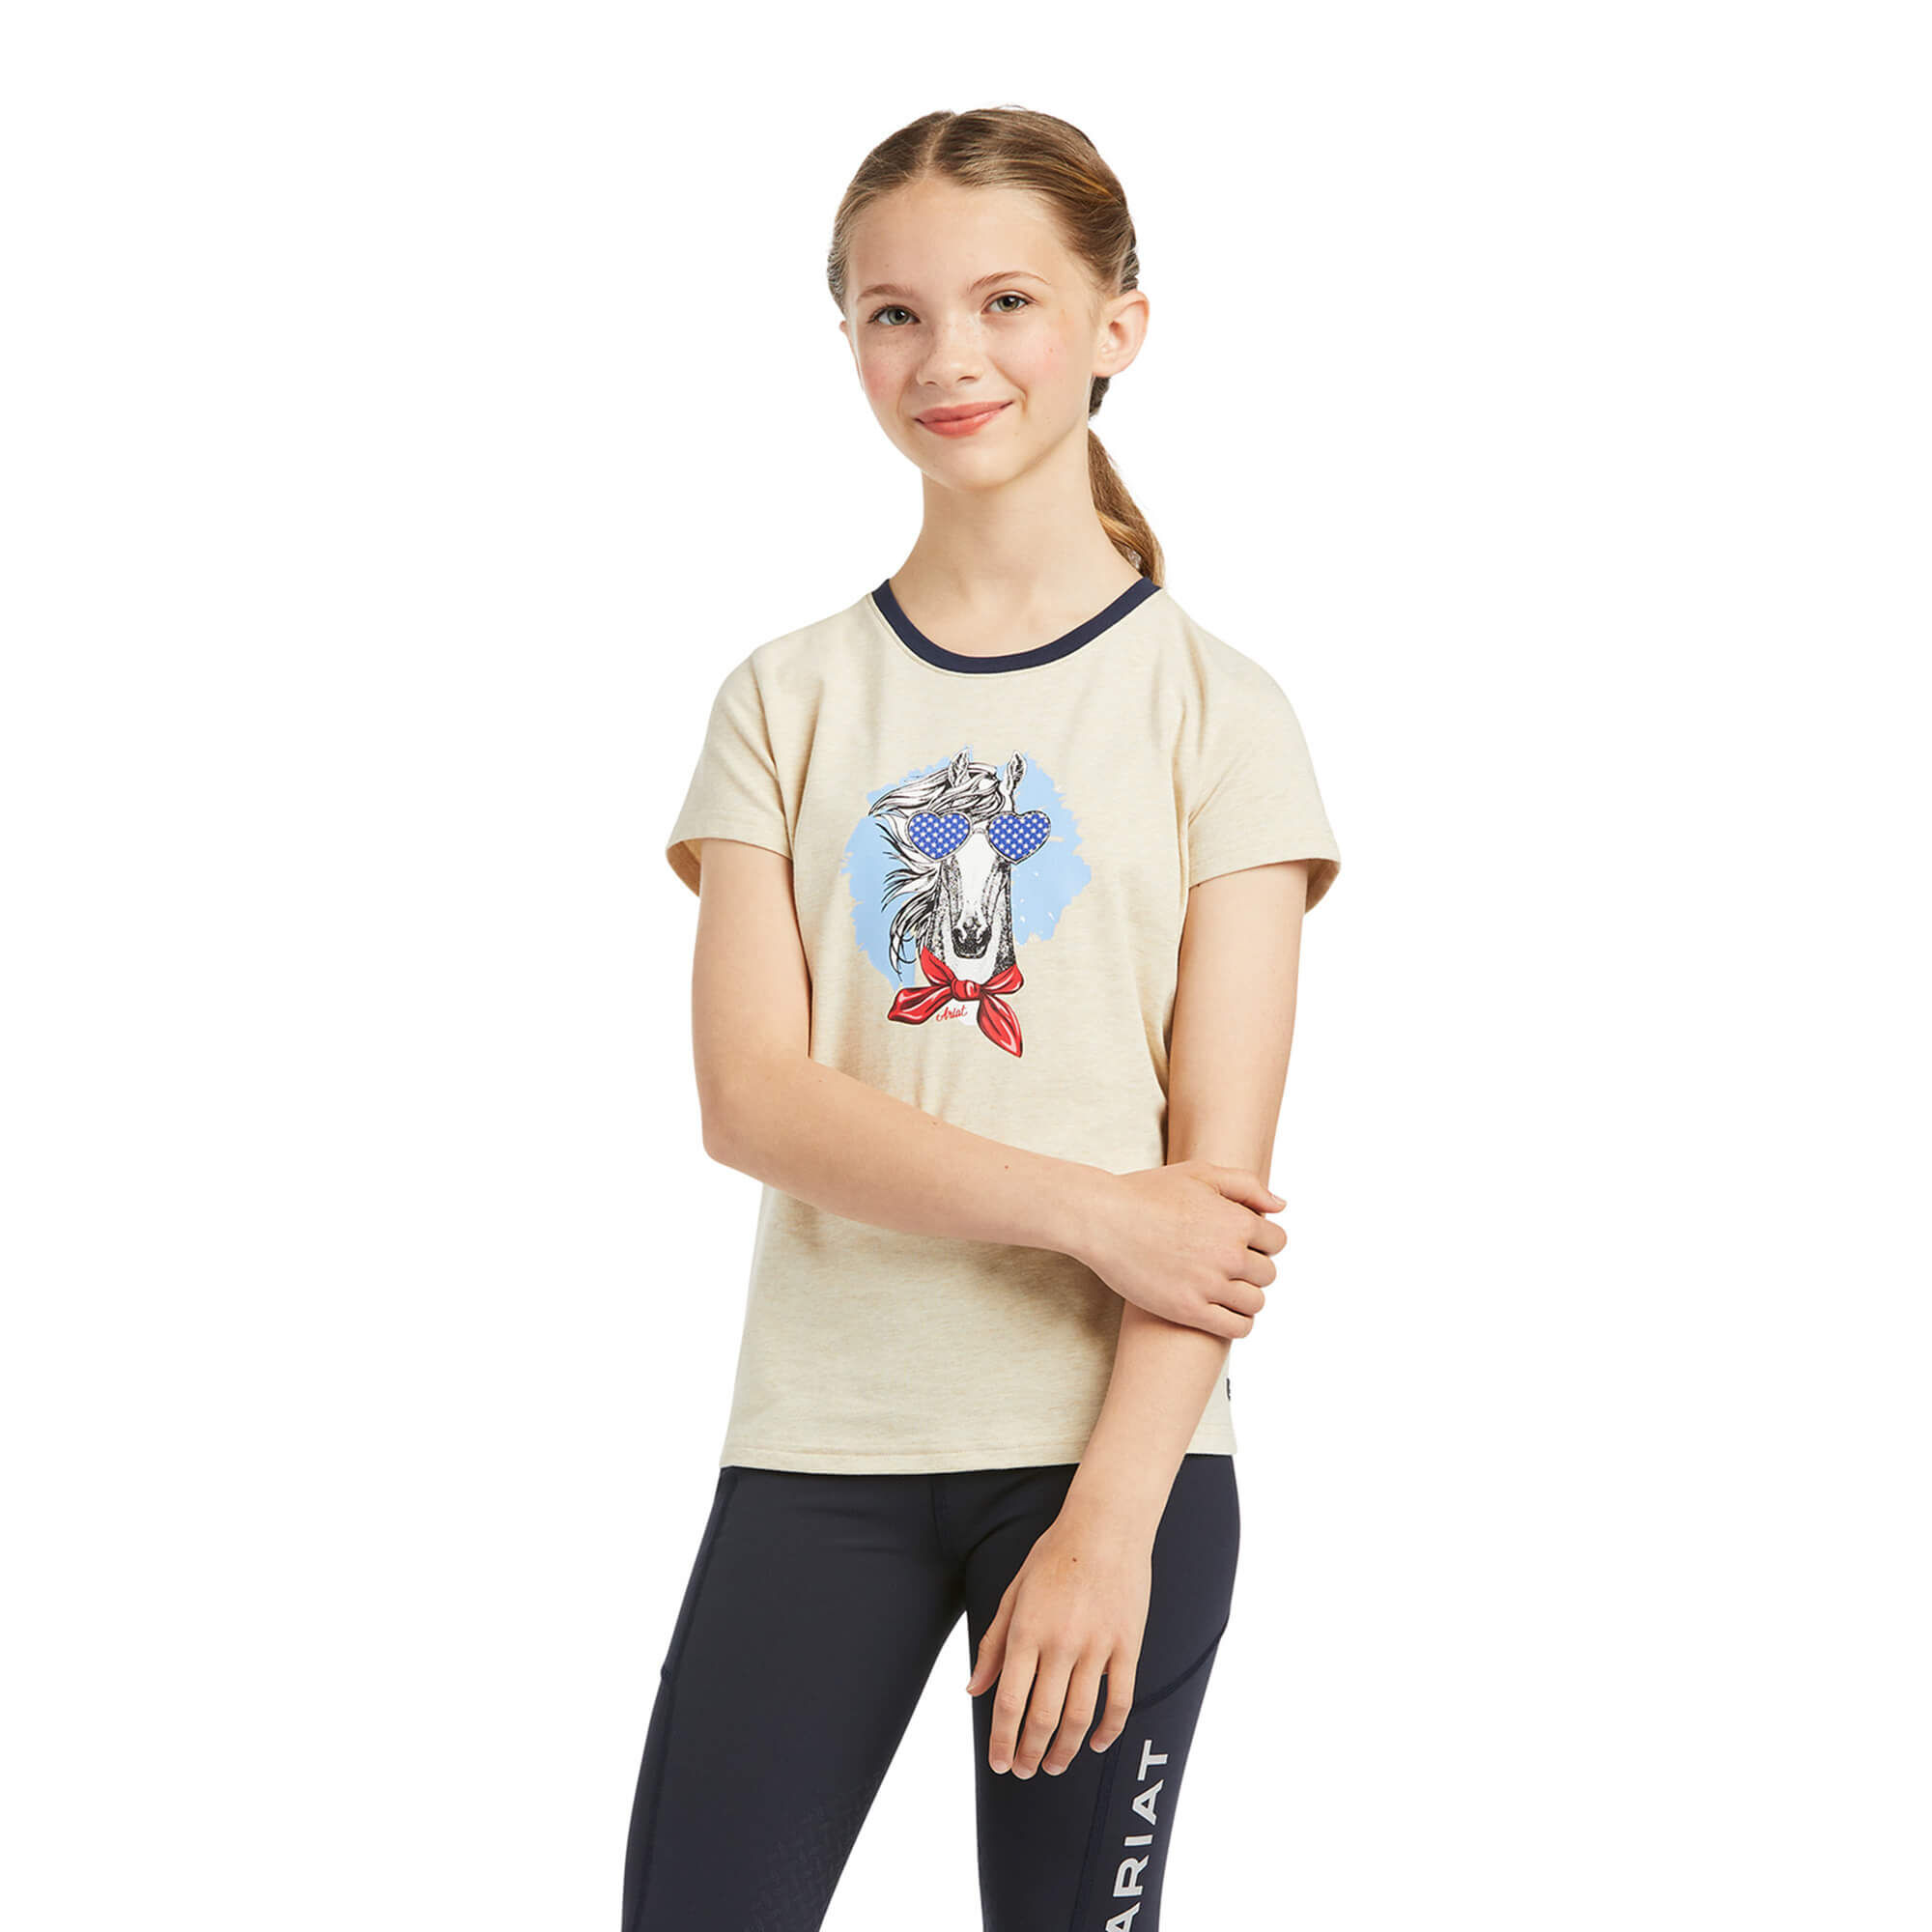 Kids' English Apparel and Footwear | Ariat